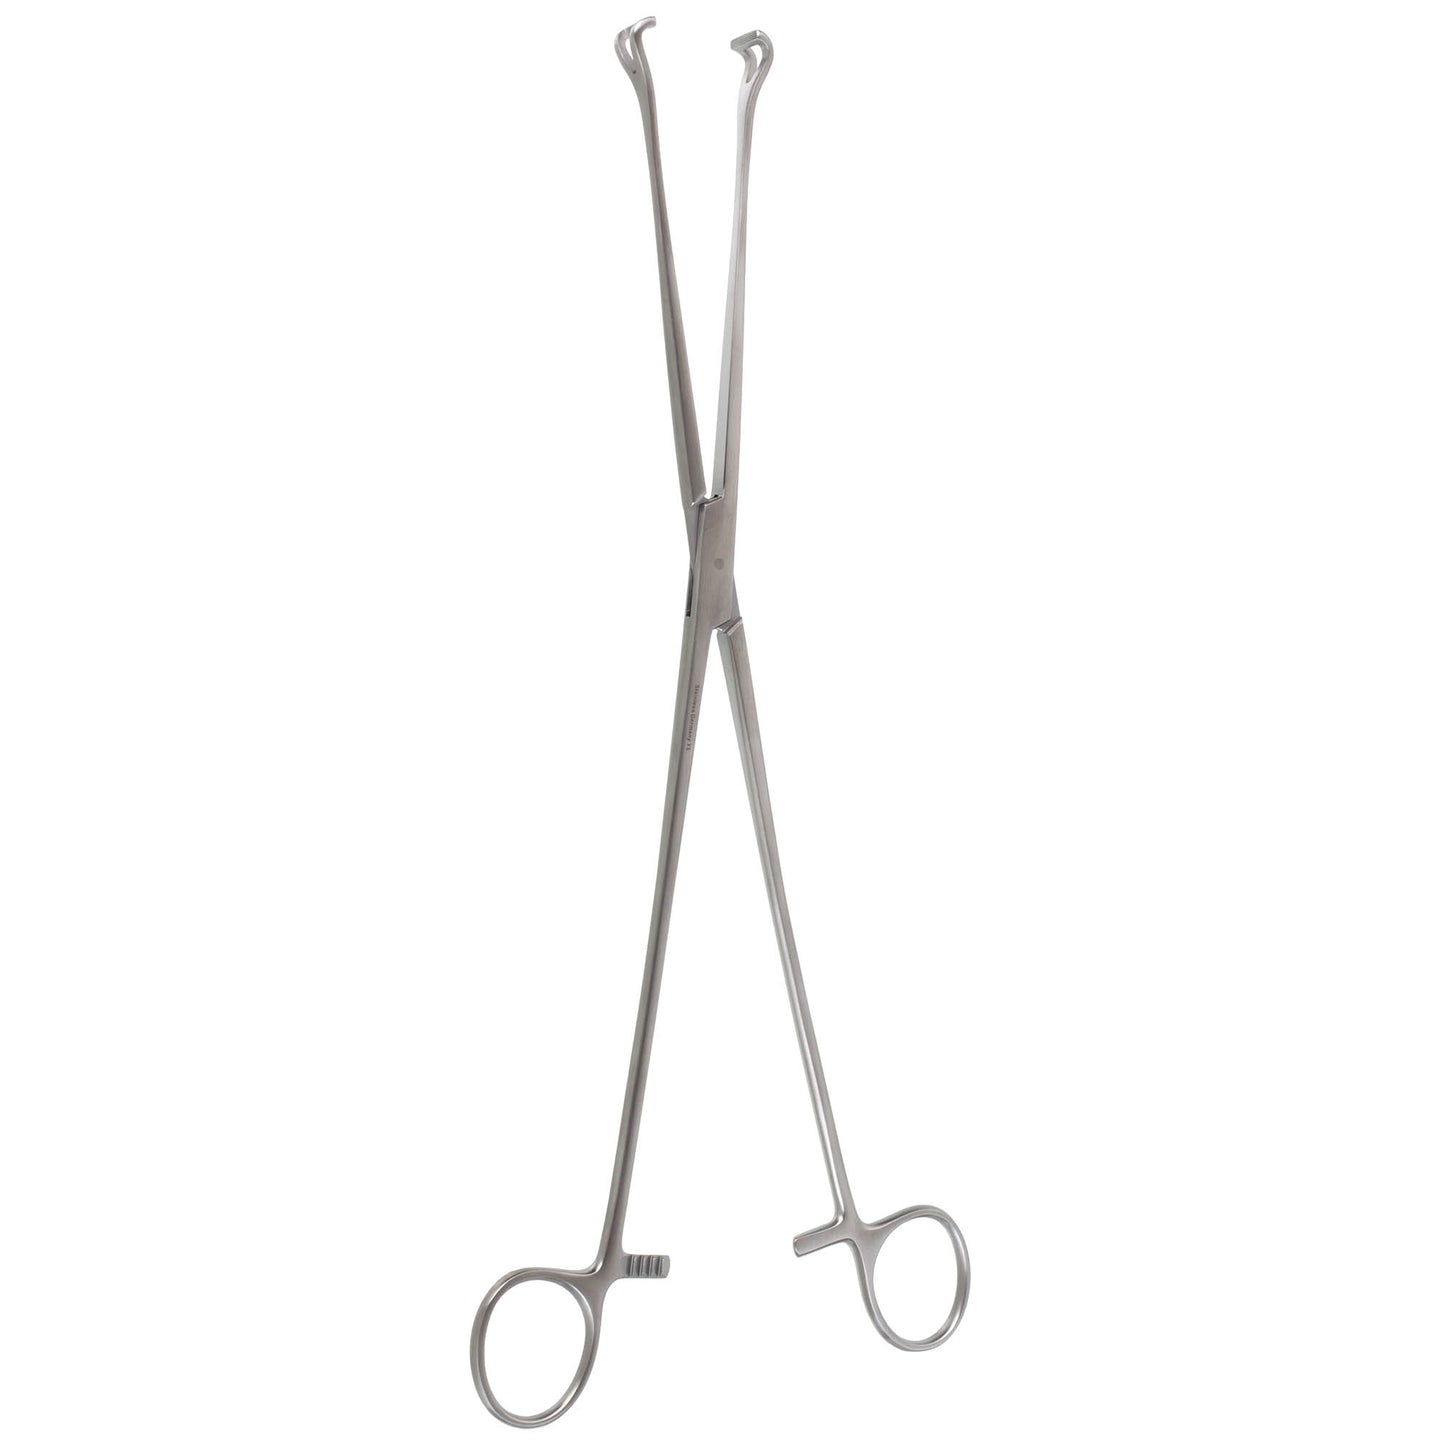 Jaw width of Babcock Tissue Forceps, 11mm